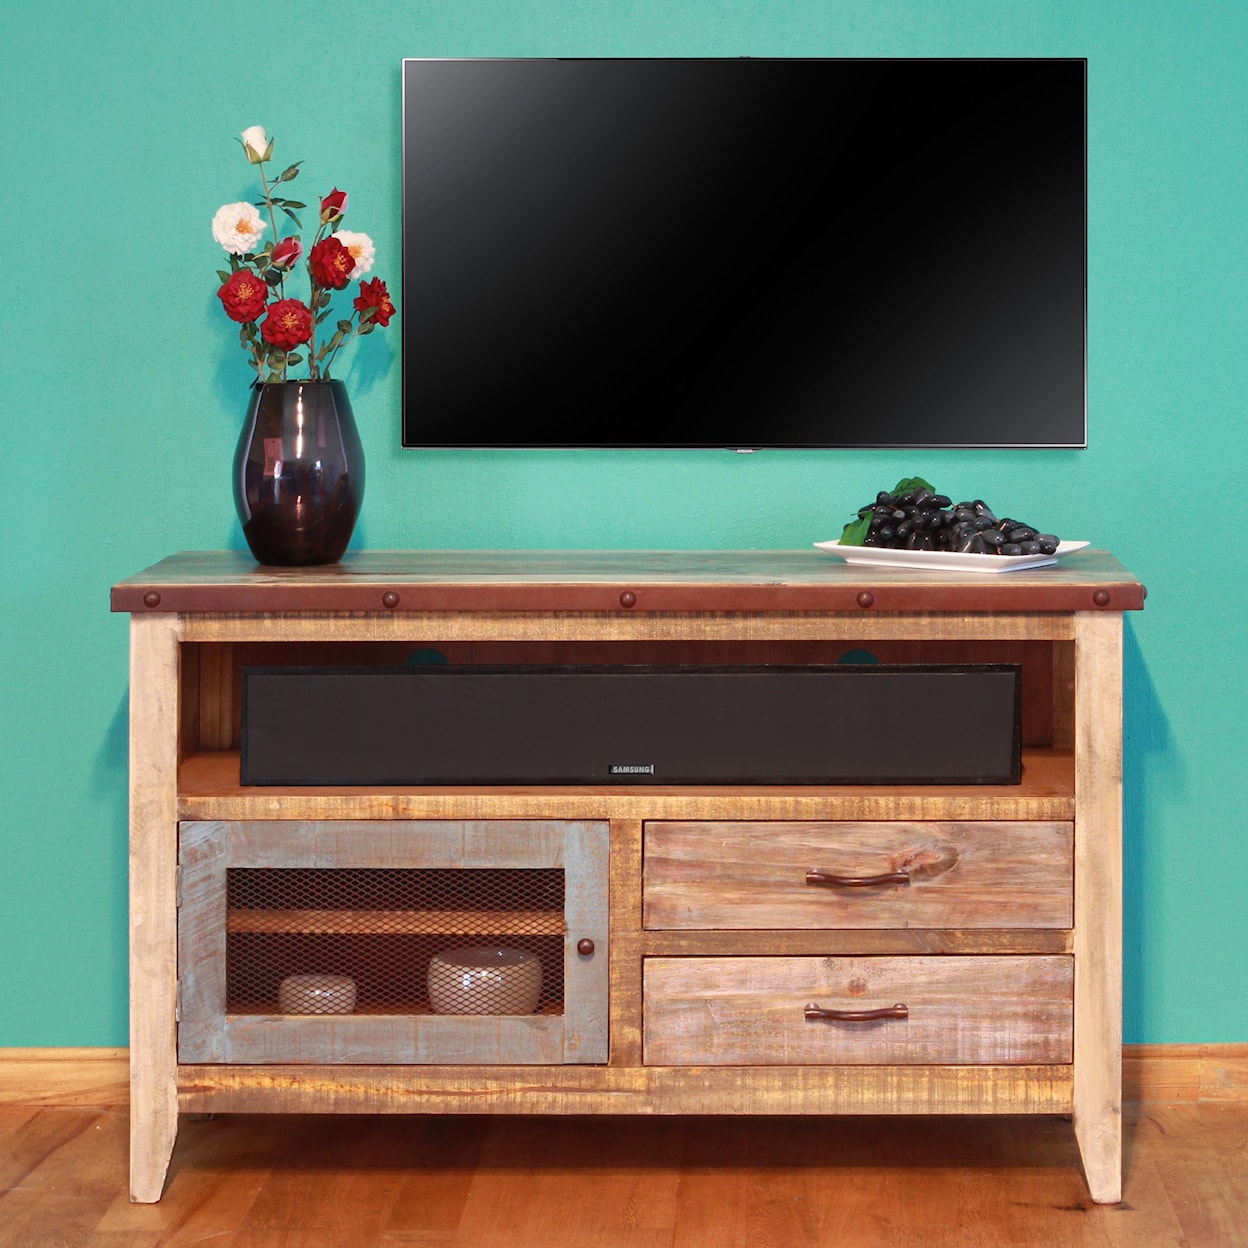 IFD 900 Antique Solid Pine 52" TV Stand